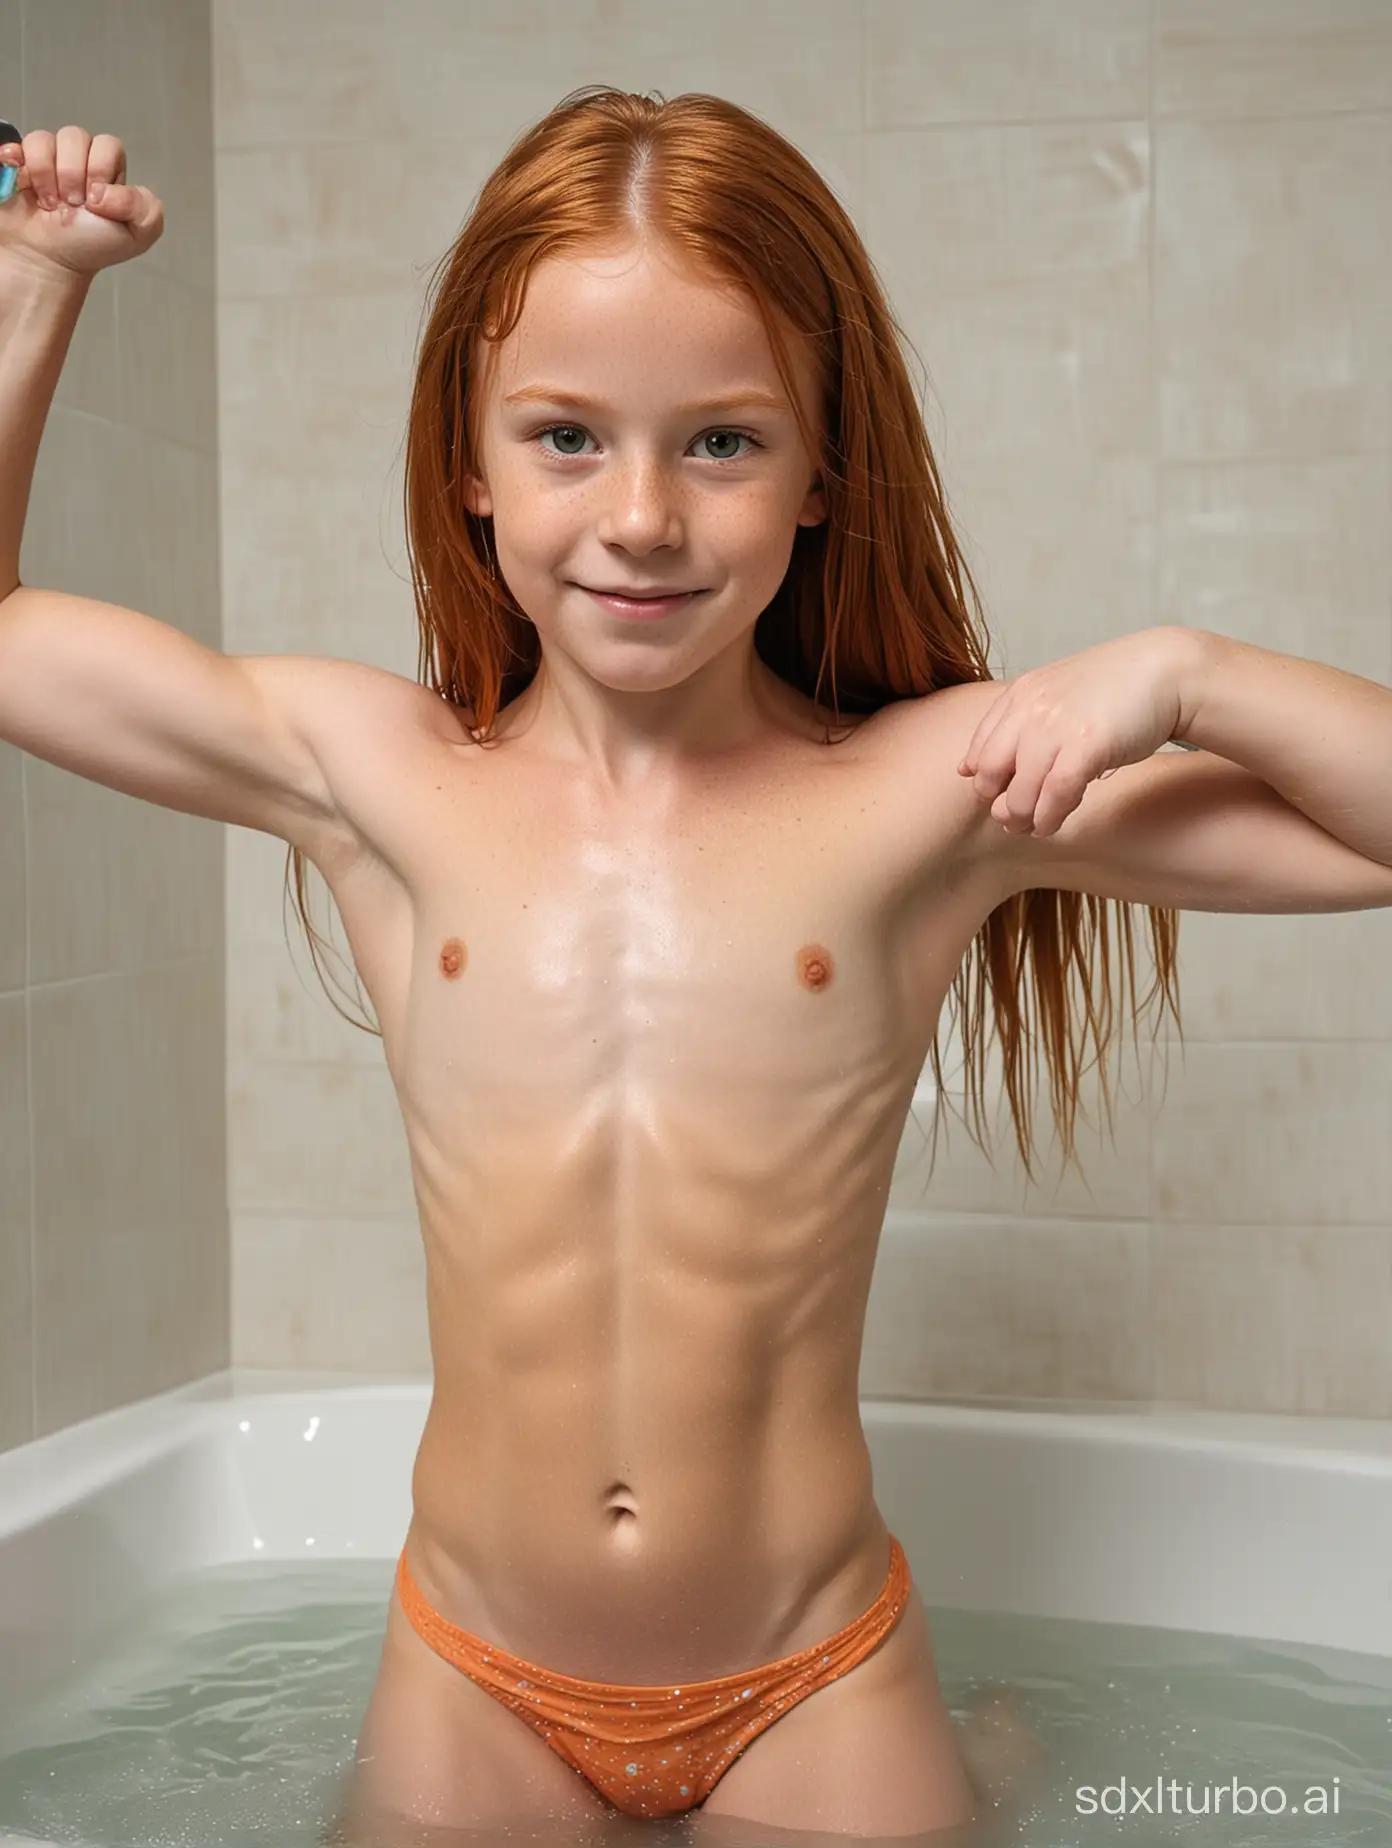 9 years old girl, long ginger hair, showing her very muscular abs, bathing